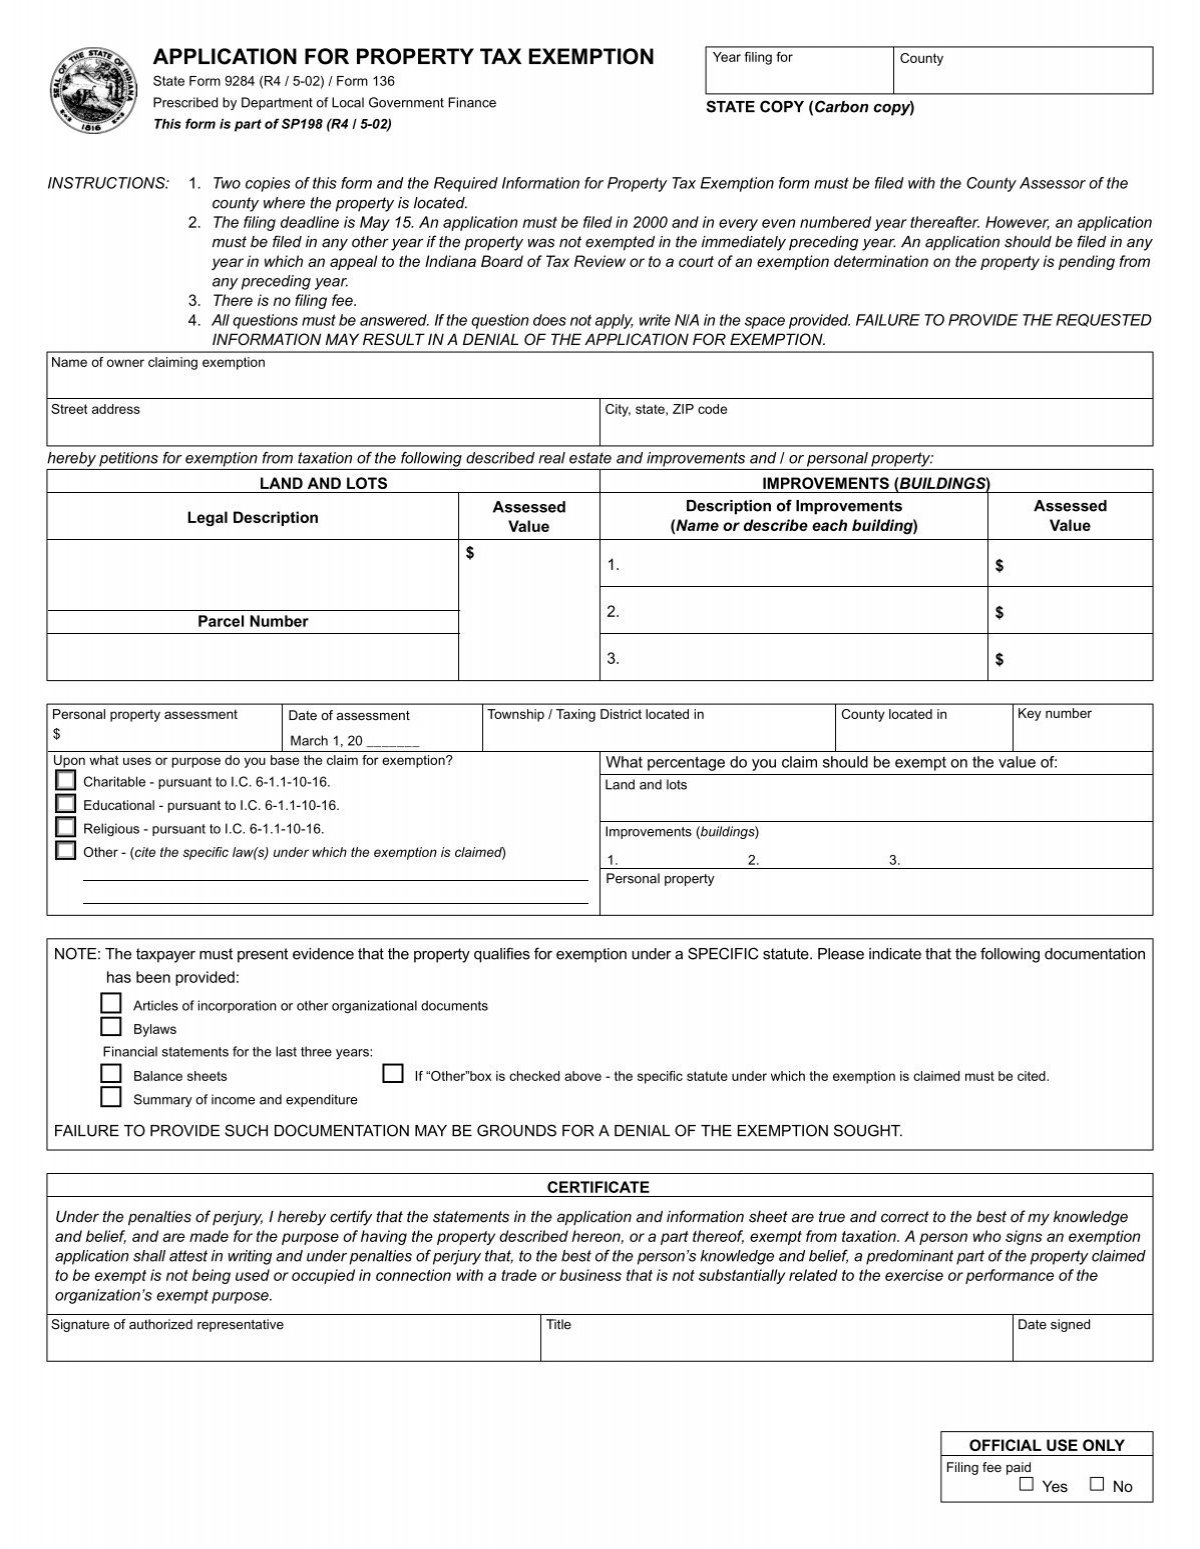 form-136-application-for-property-tax-exemption